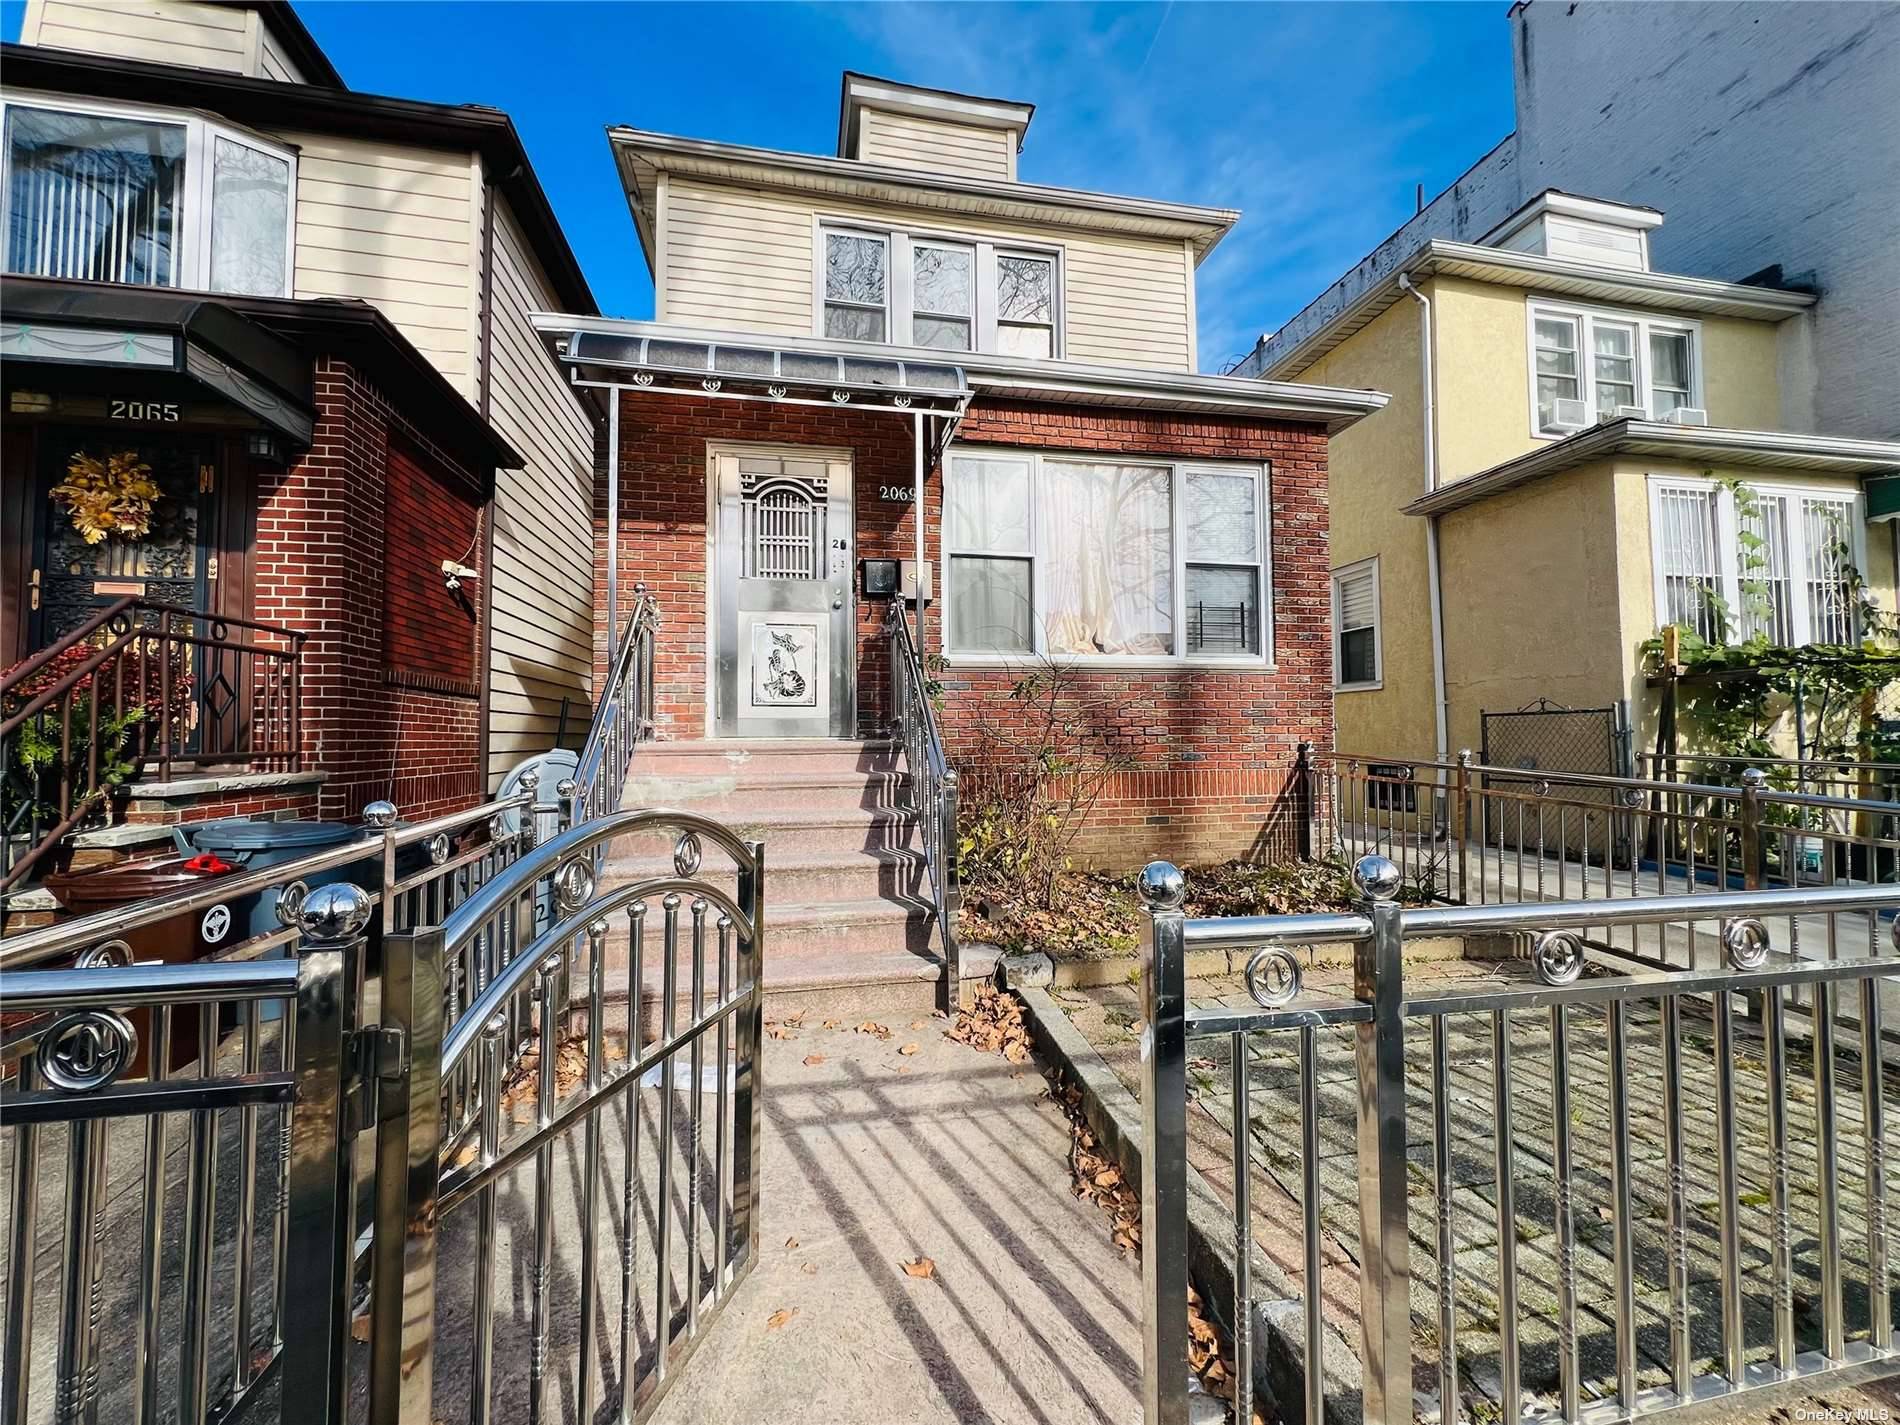 Beautiful well maintained two family house with garage in Bensonhurst.